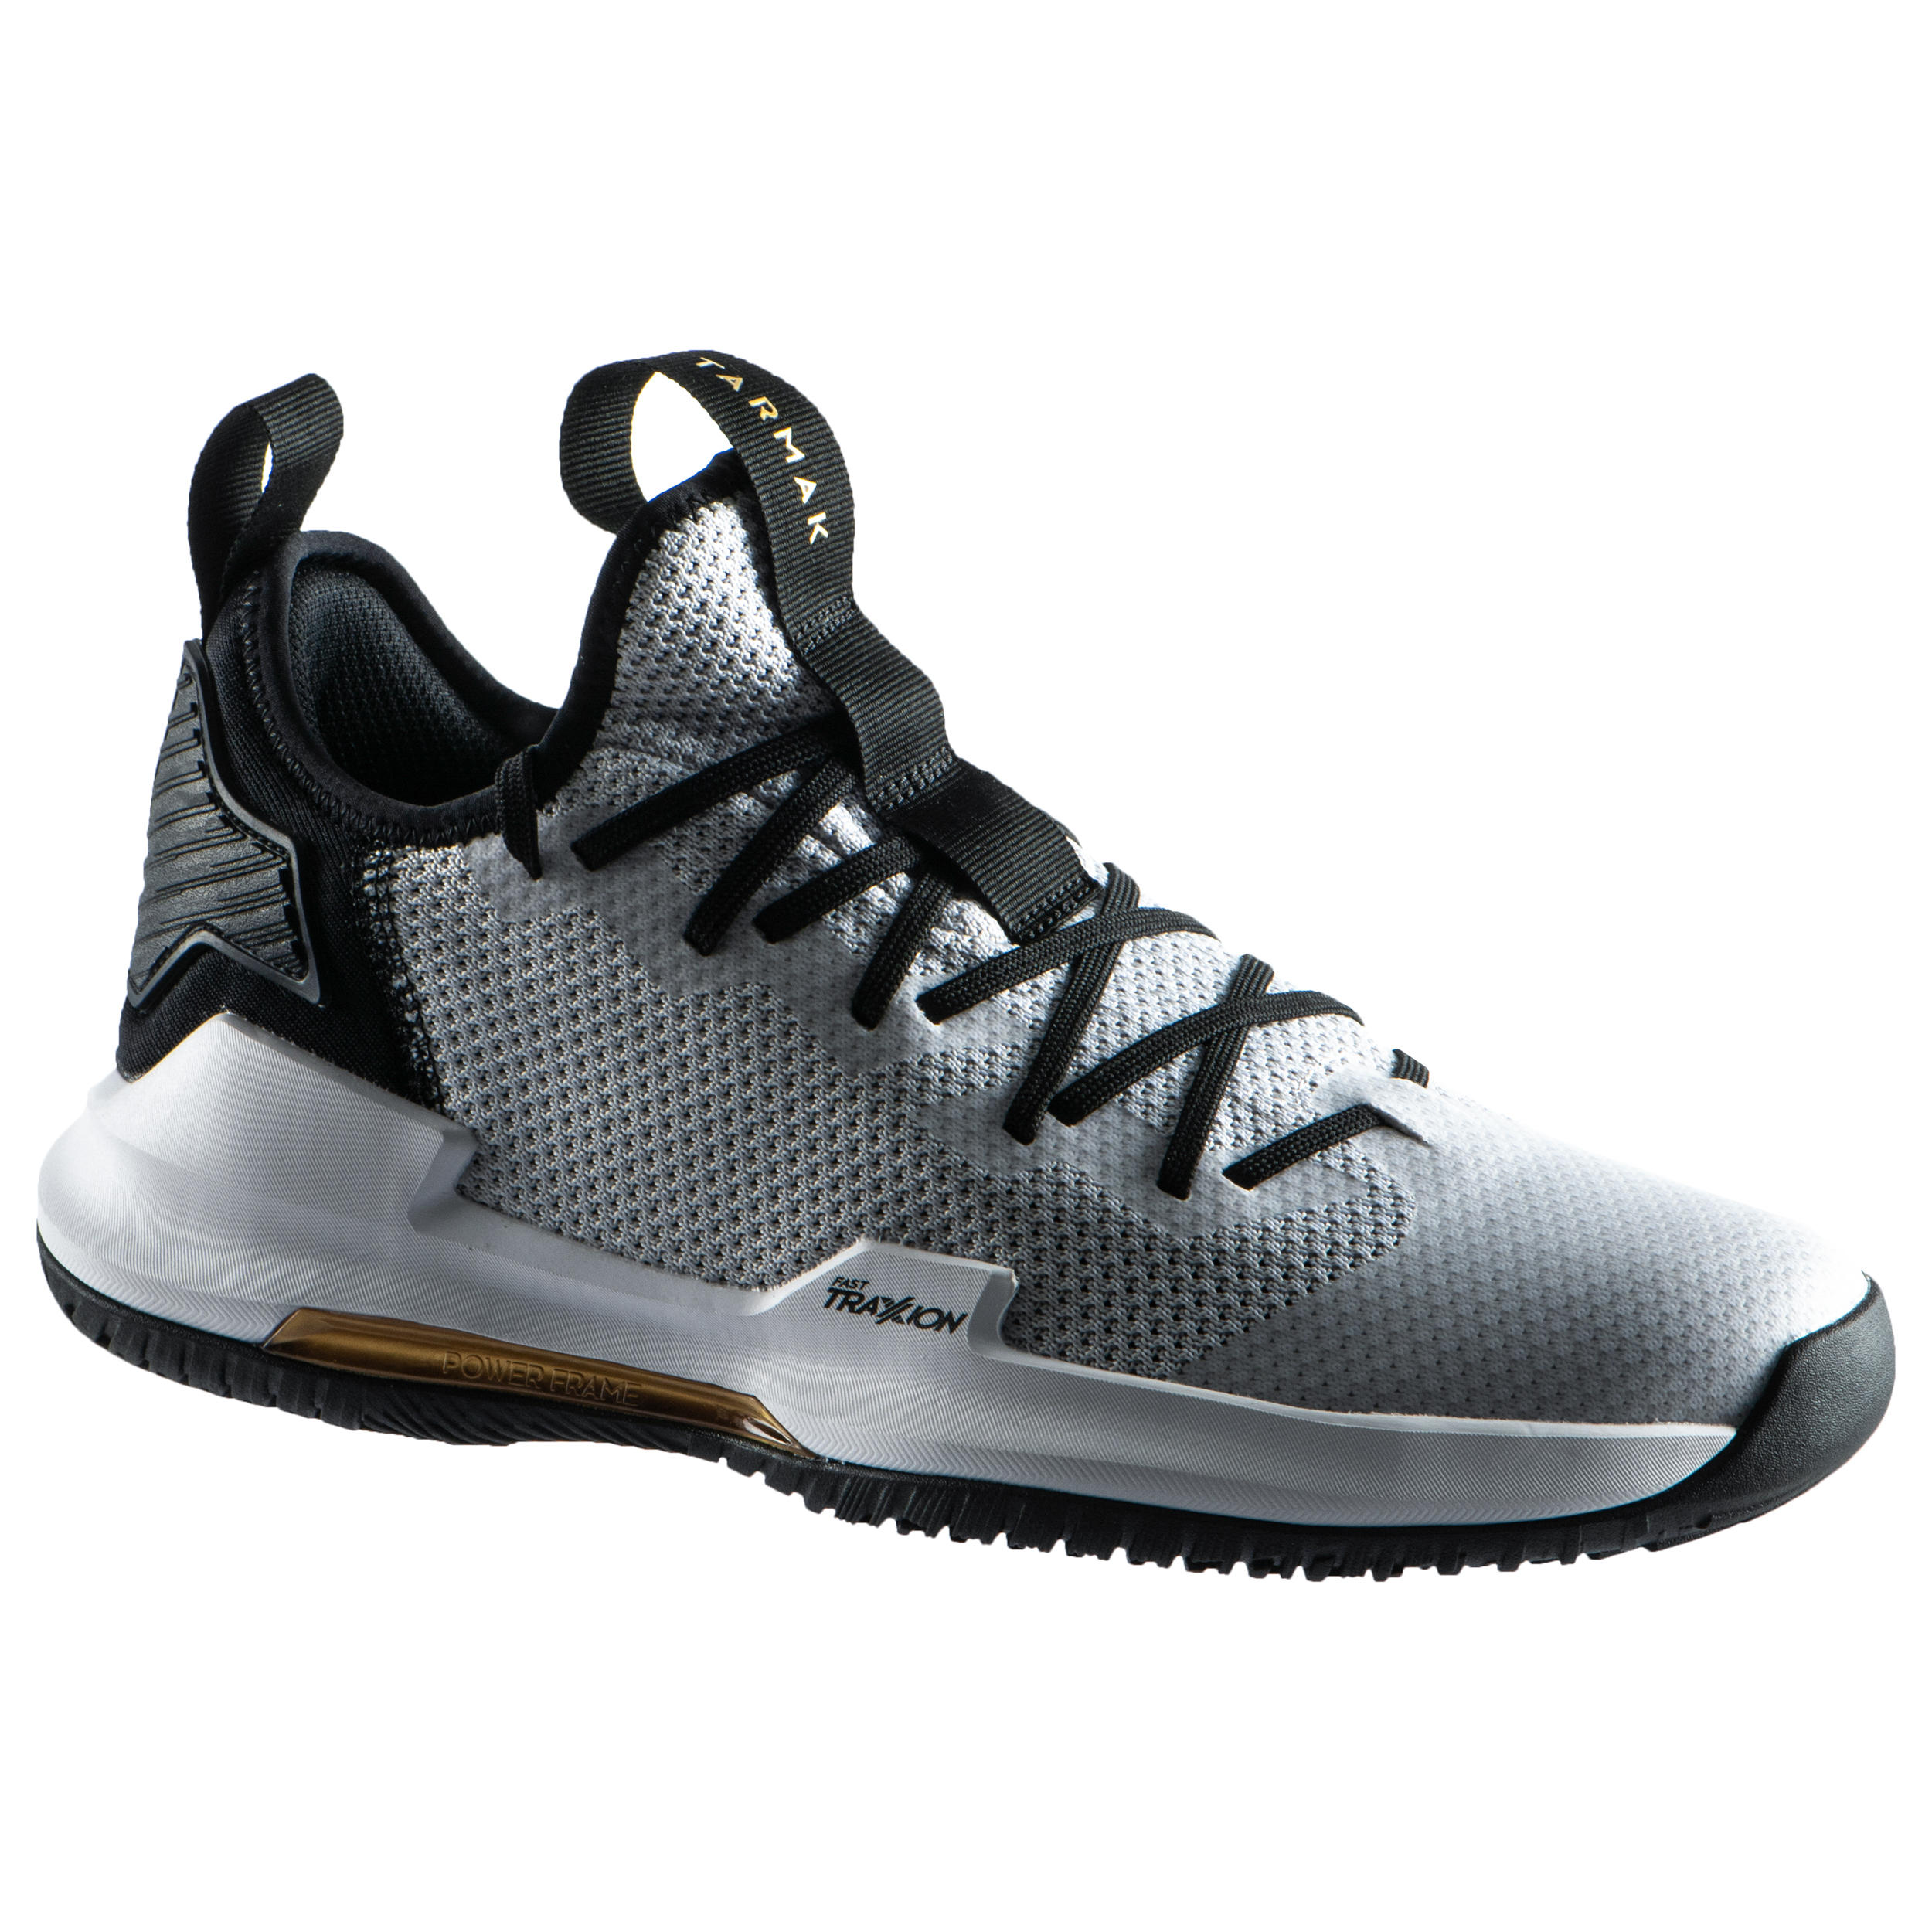 Fast 500 Low-Rise Basketball Shoes Grey 